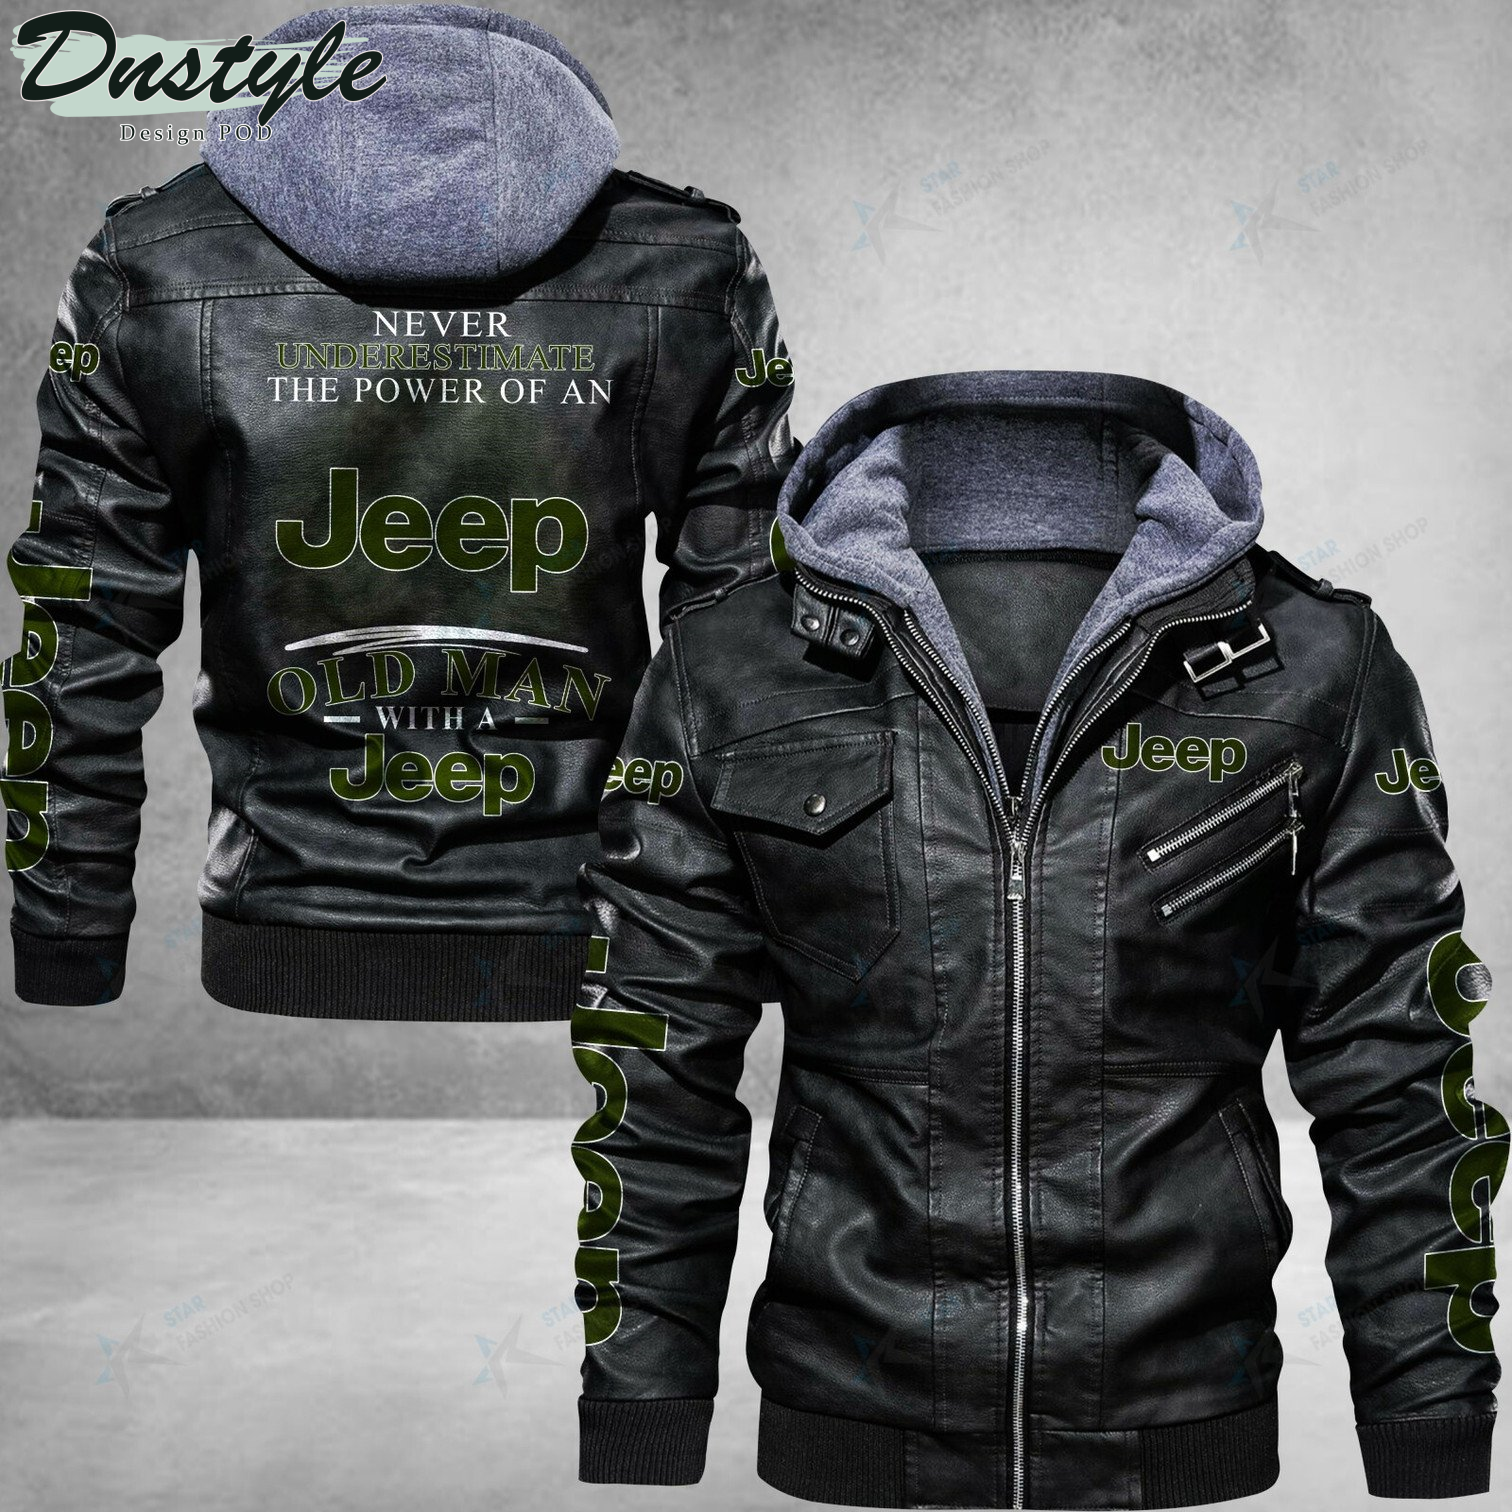 Jeep never underestimate the power of an old man leather jacket